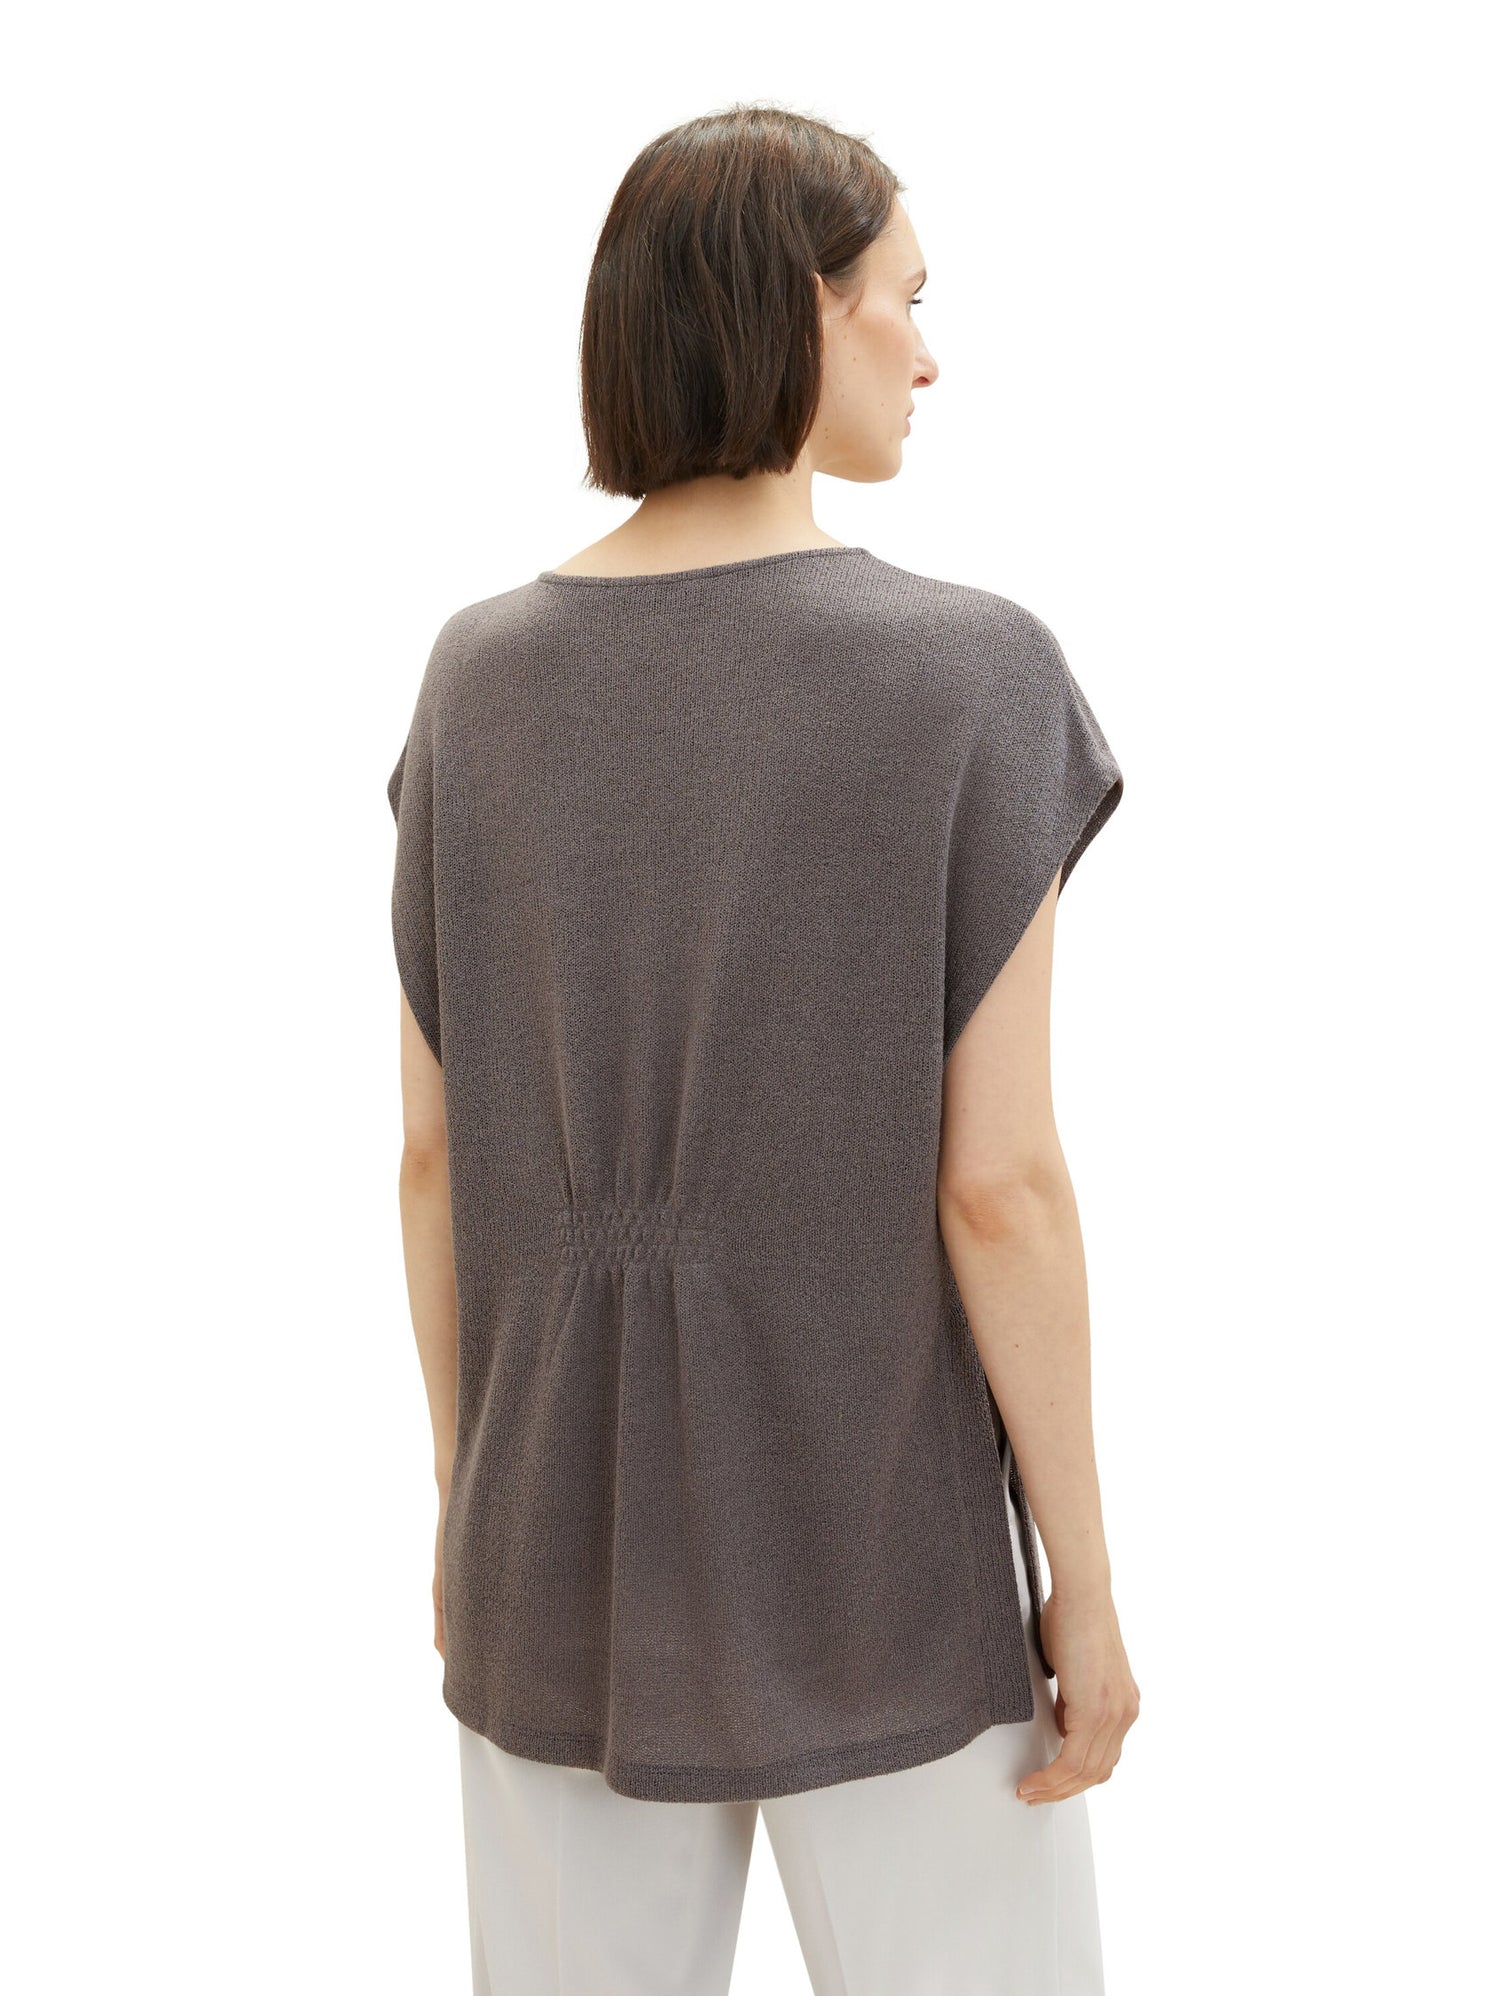 Blouse With Cap Sleeve_1038726_32251_04